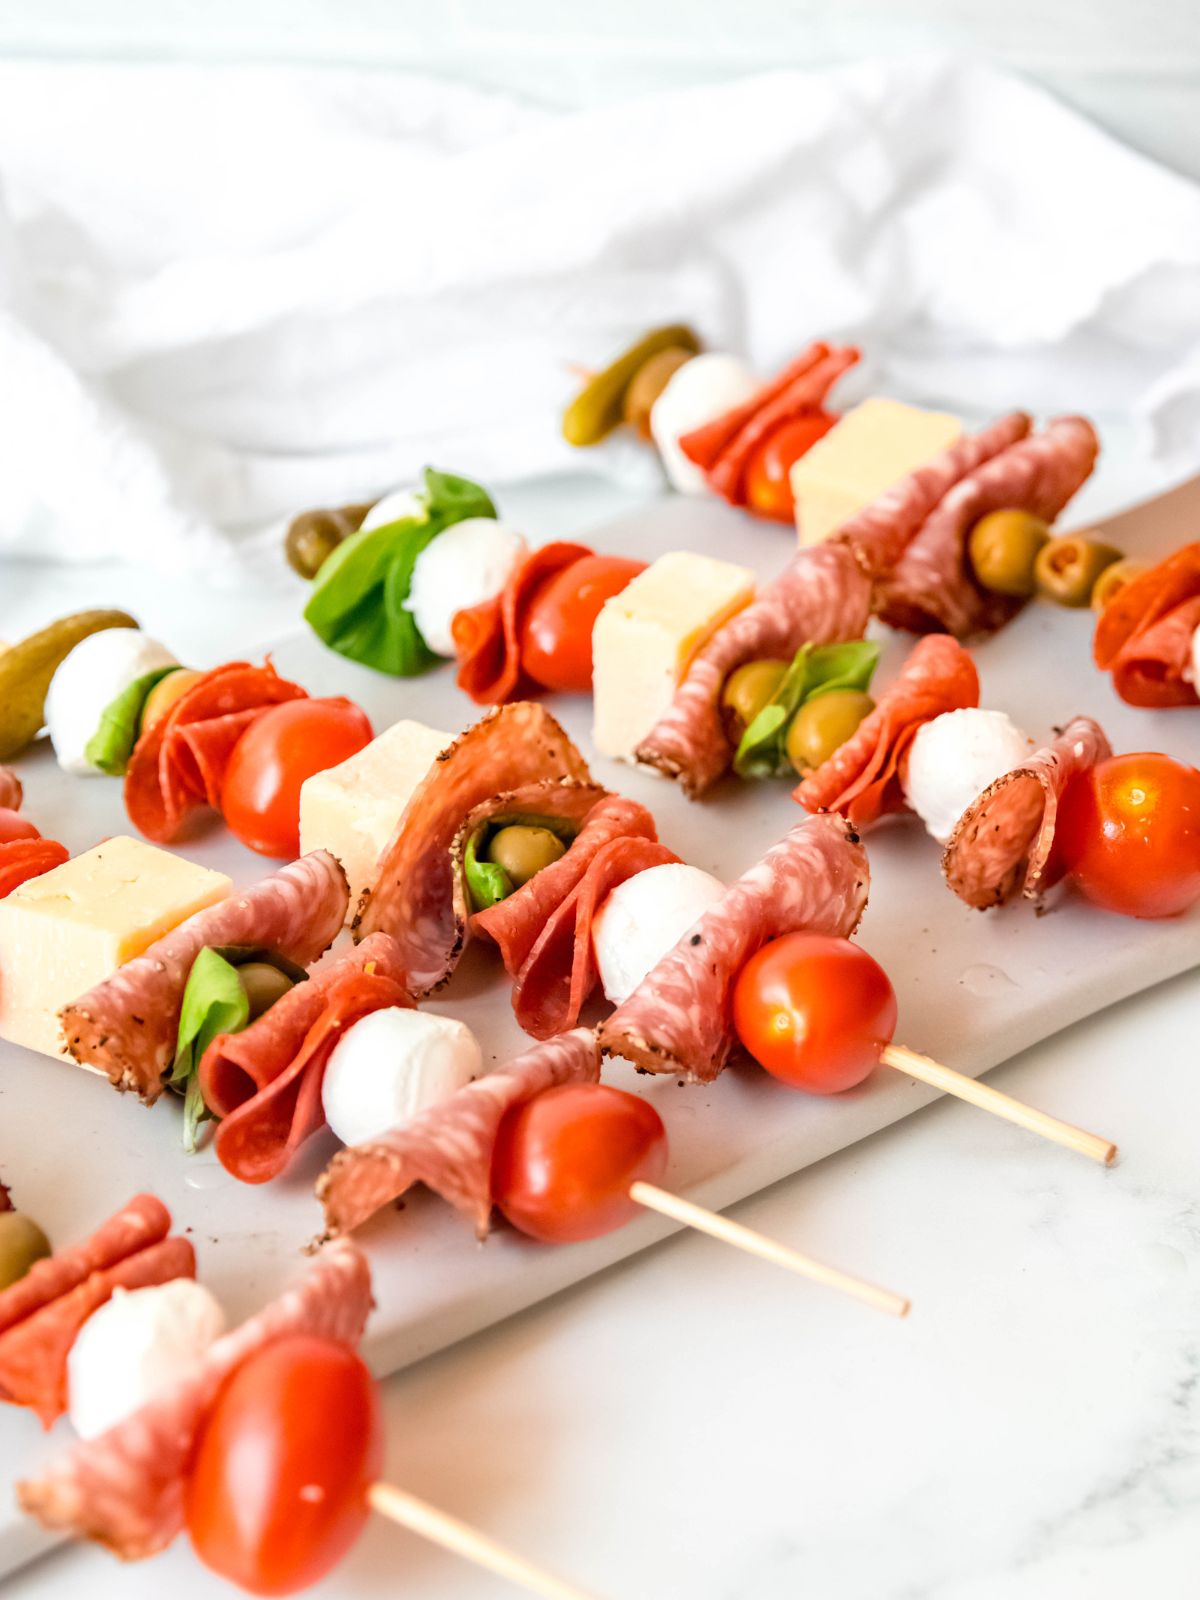 a table with a serving platter of charcuterie skewers ready to grab and eat.